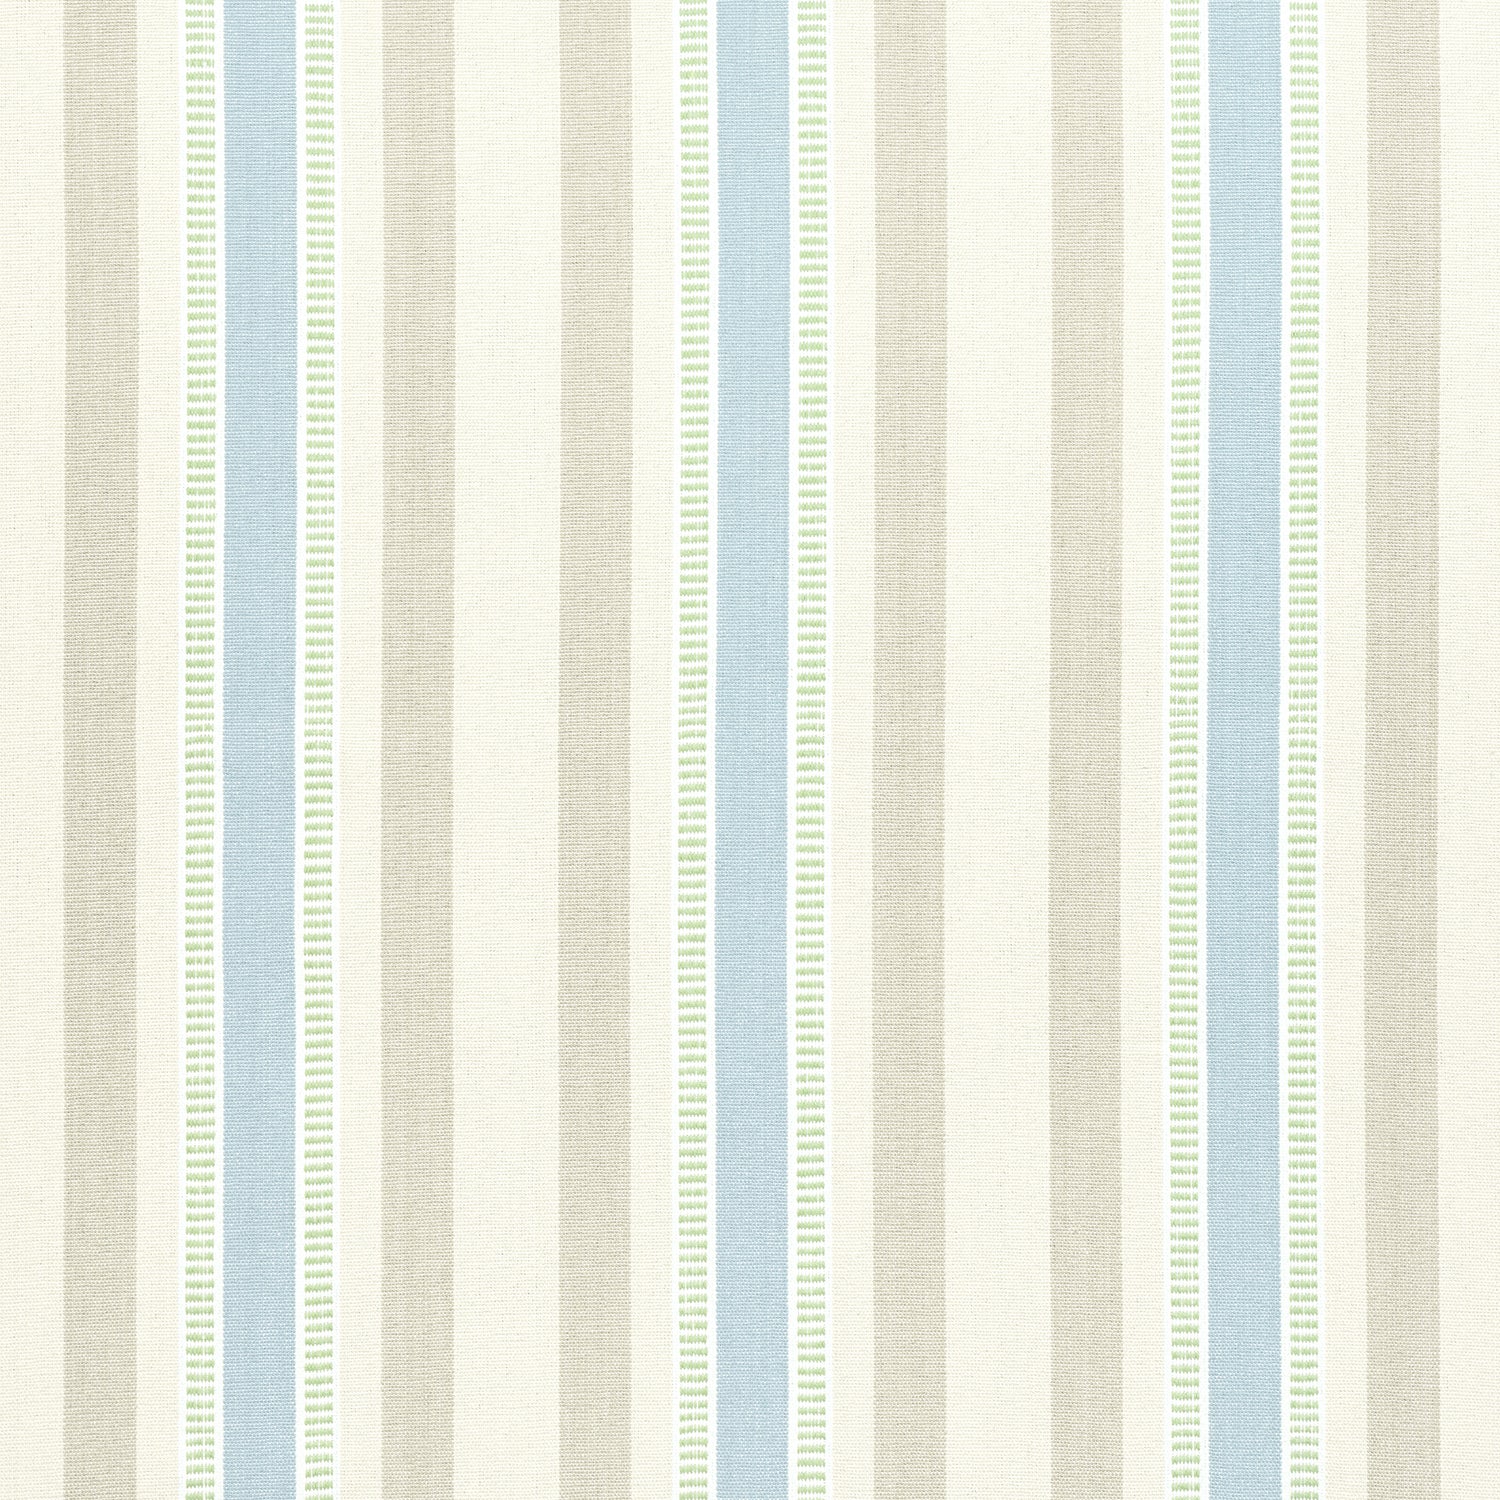 Dearden Stripe fabric in beige and blue color - pattern number AW23151 - by Anna French in the Willow Tree collection